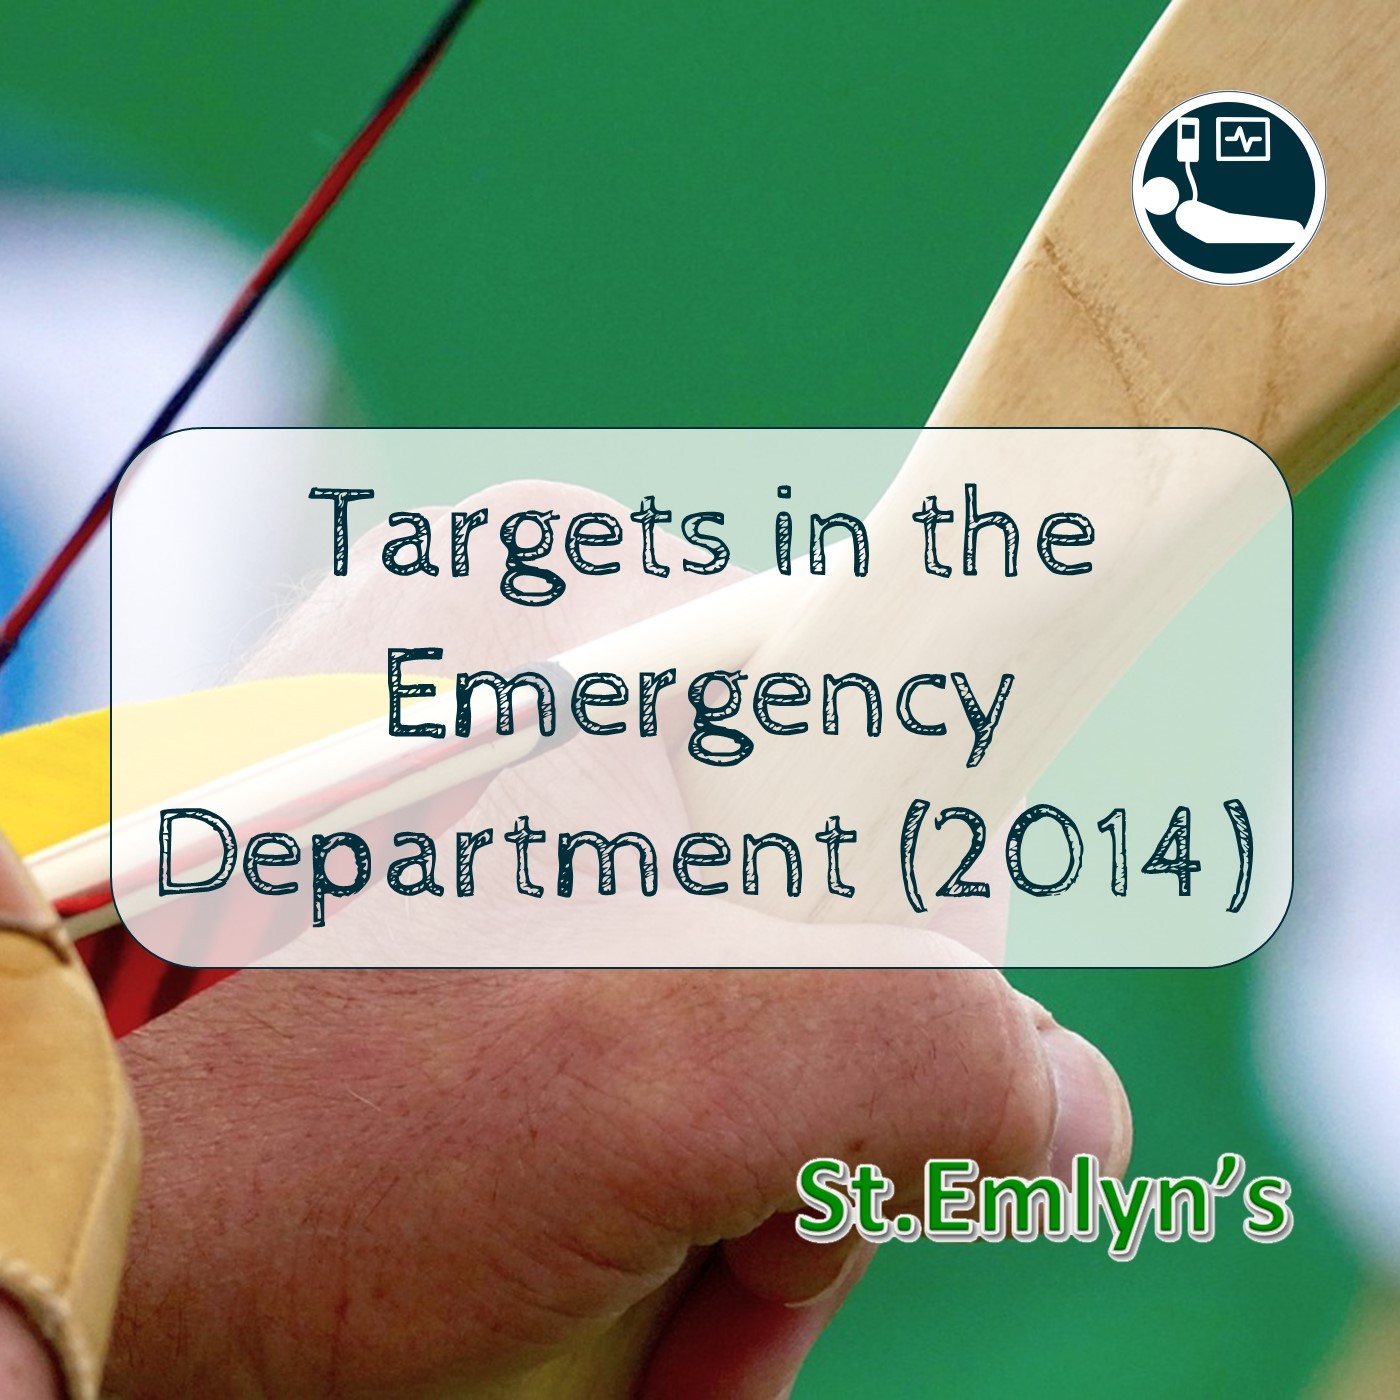 Ep 9 - Targets in the Emergency Department (2014)